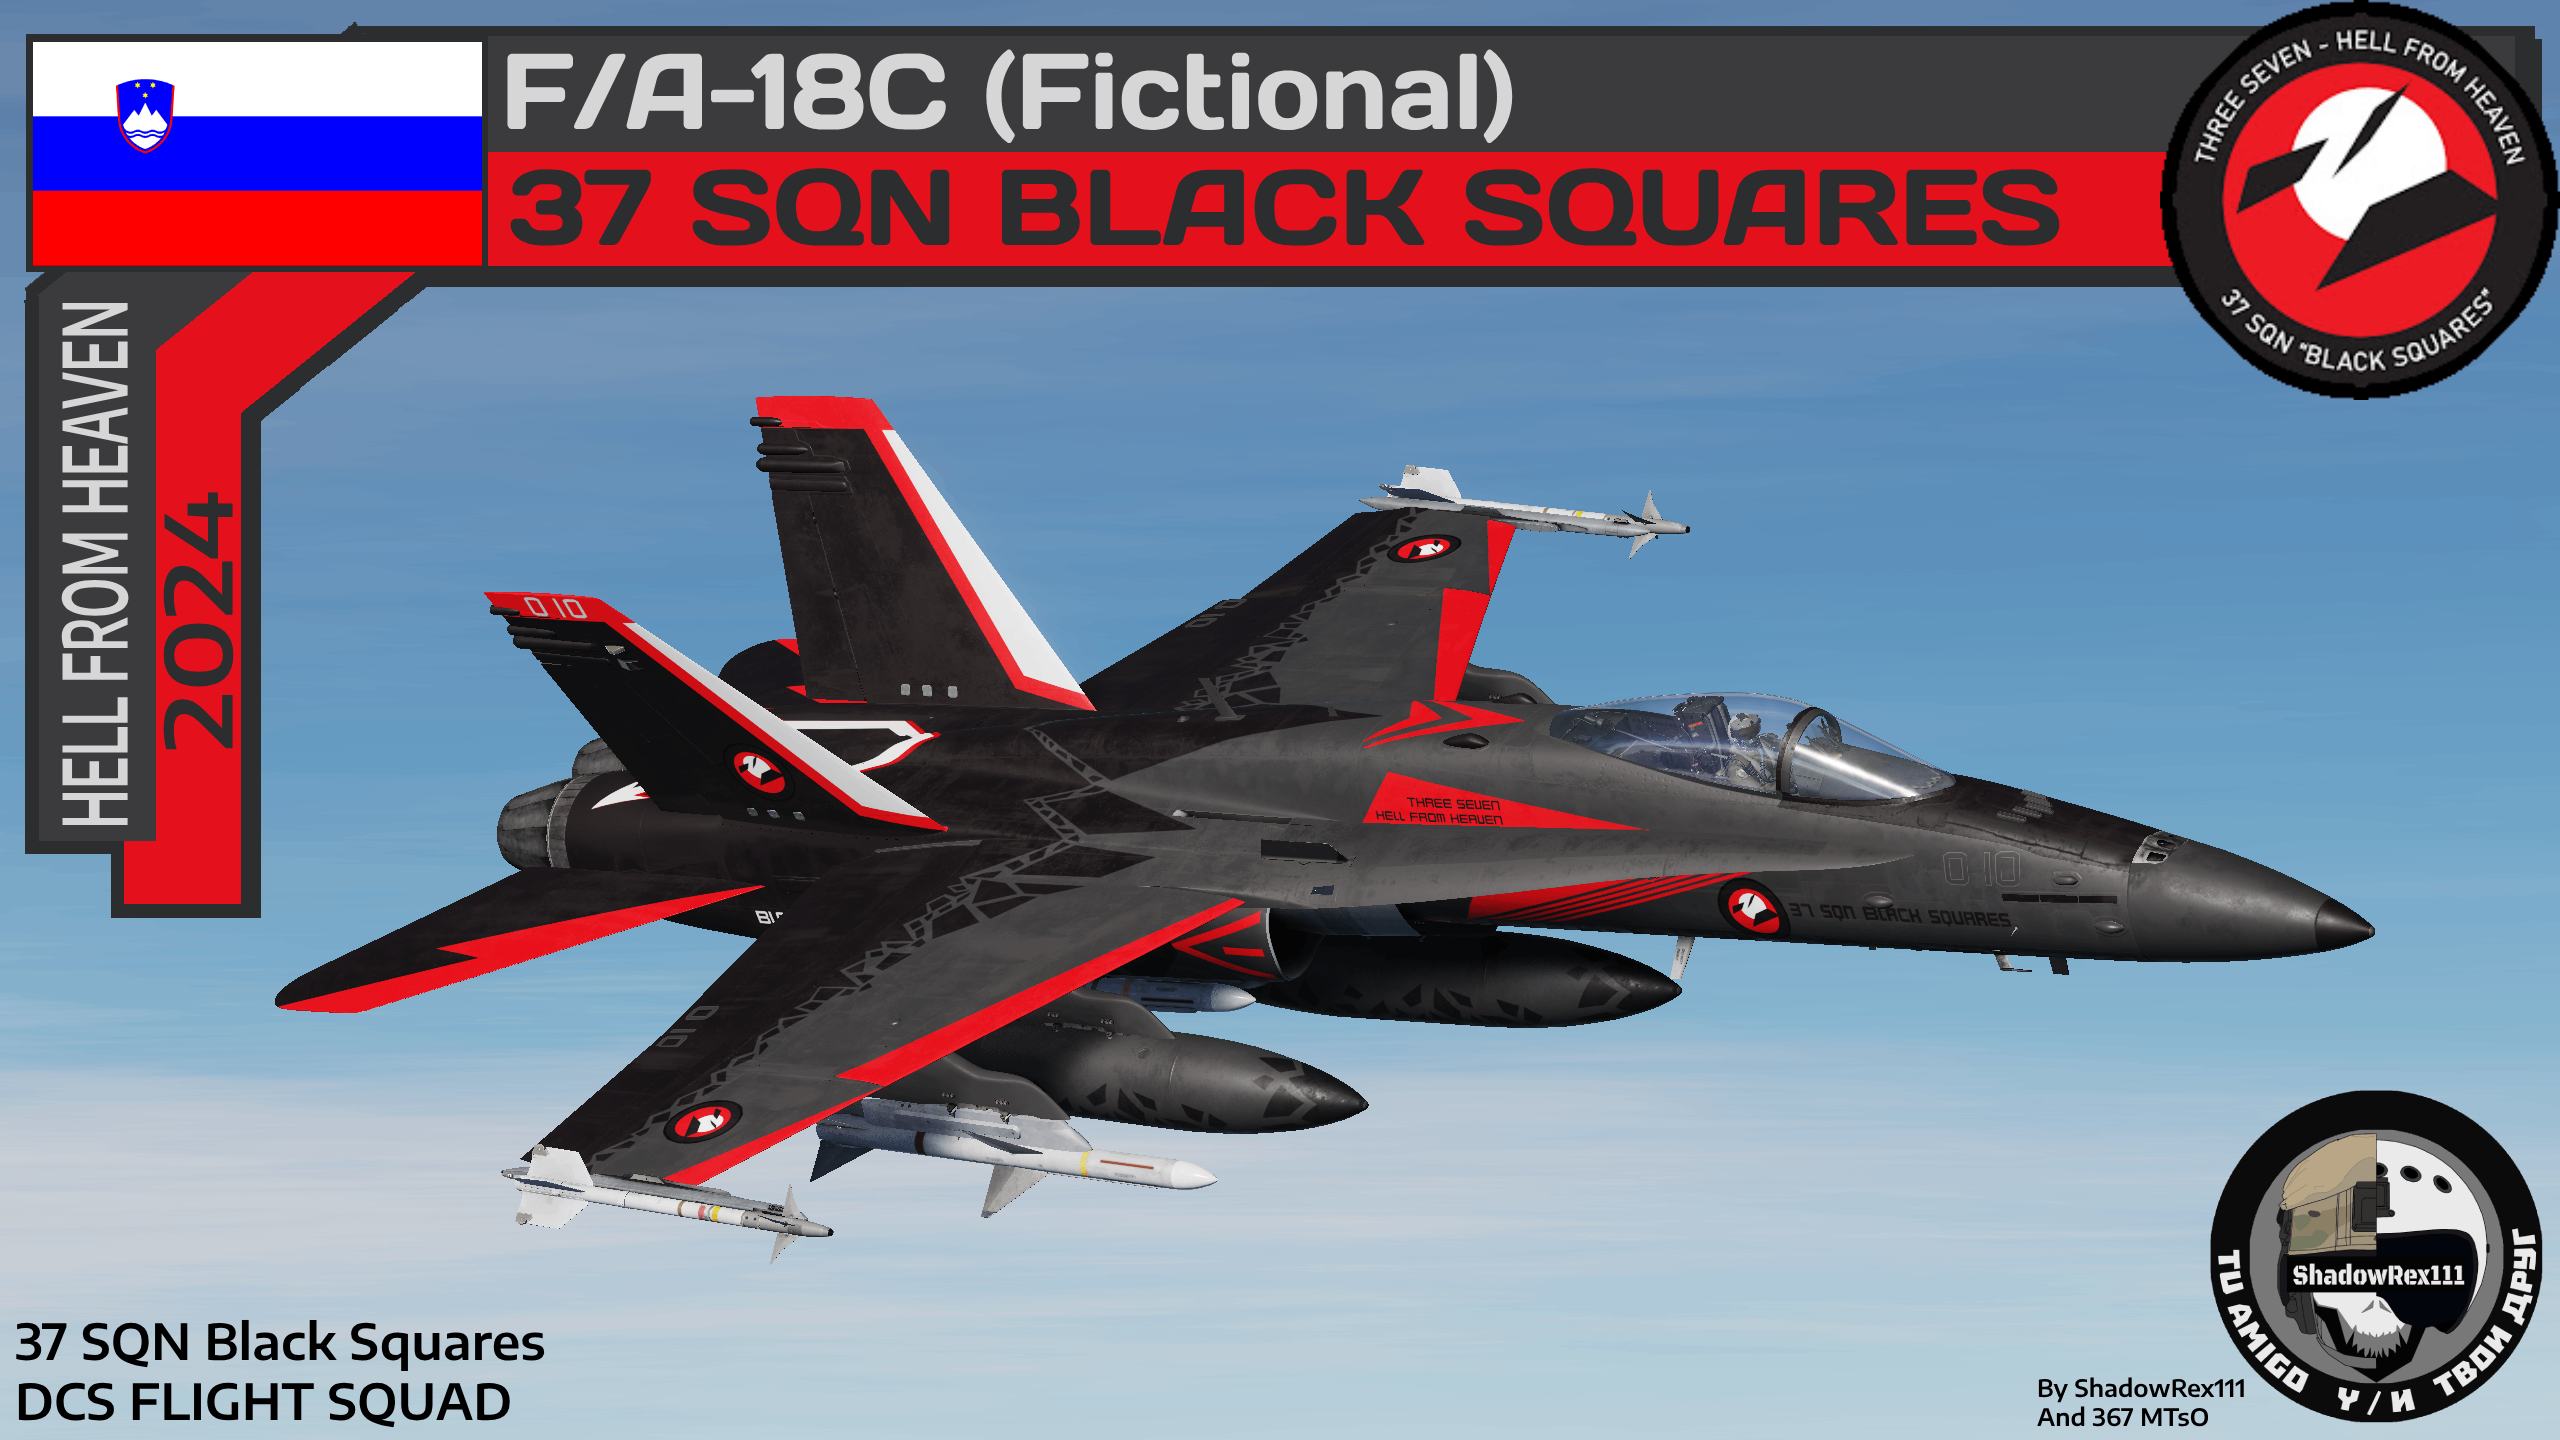 F/A-18C For the guys of the 37 SQN "Black Squares" (Fictional)